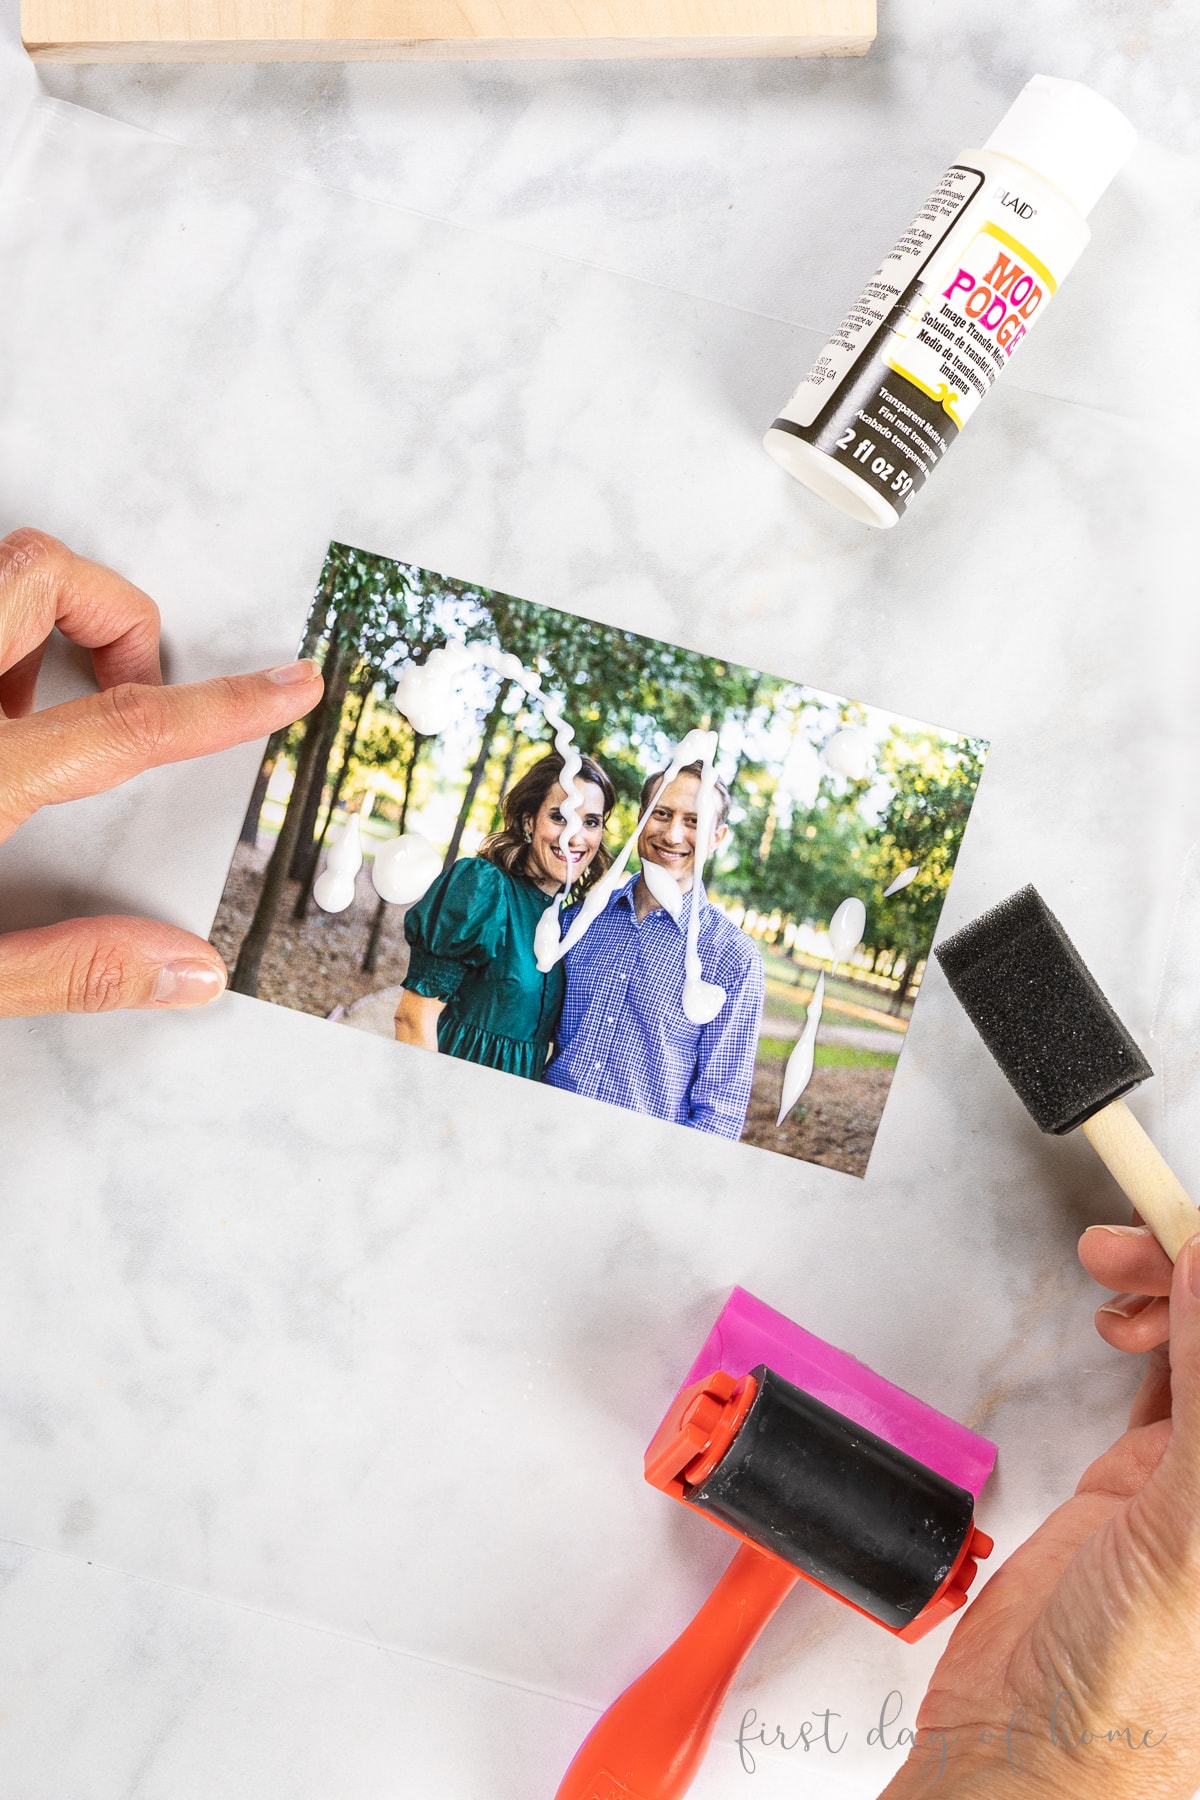 Amazing DIY Photo Transfer to Wood: A Beginner's Guide